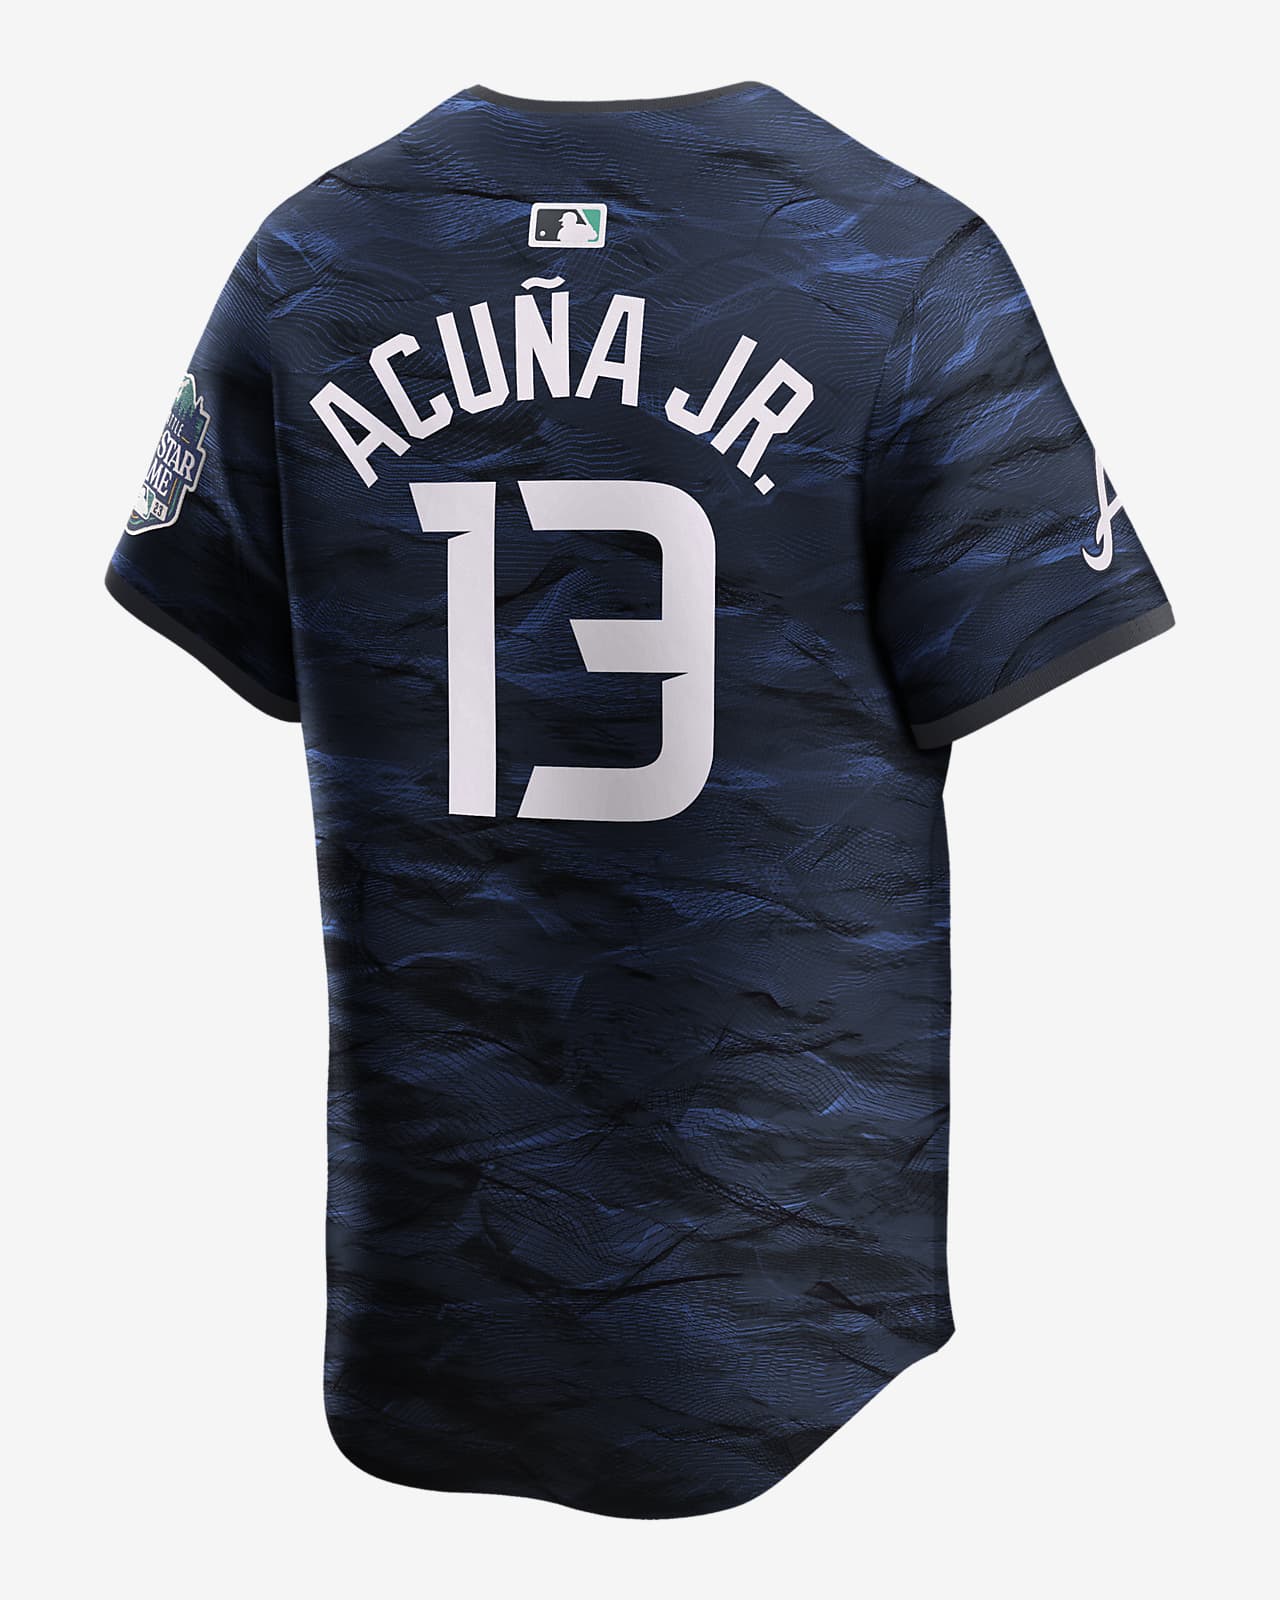 ronald acuna all star jersey